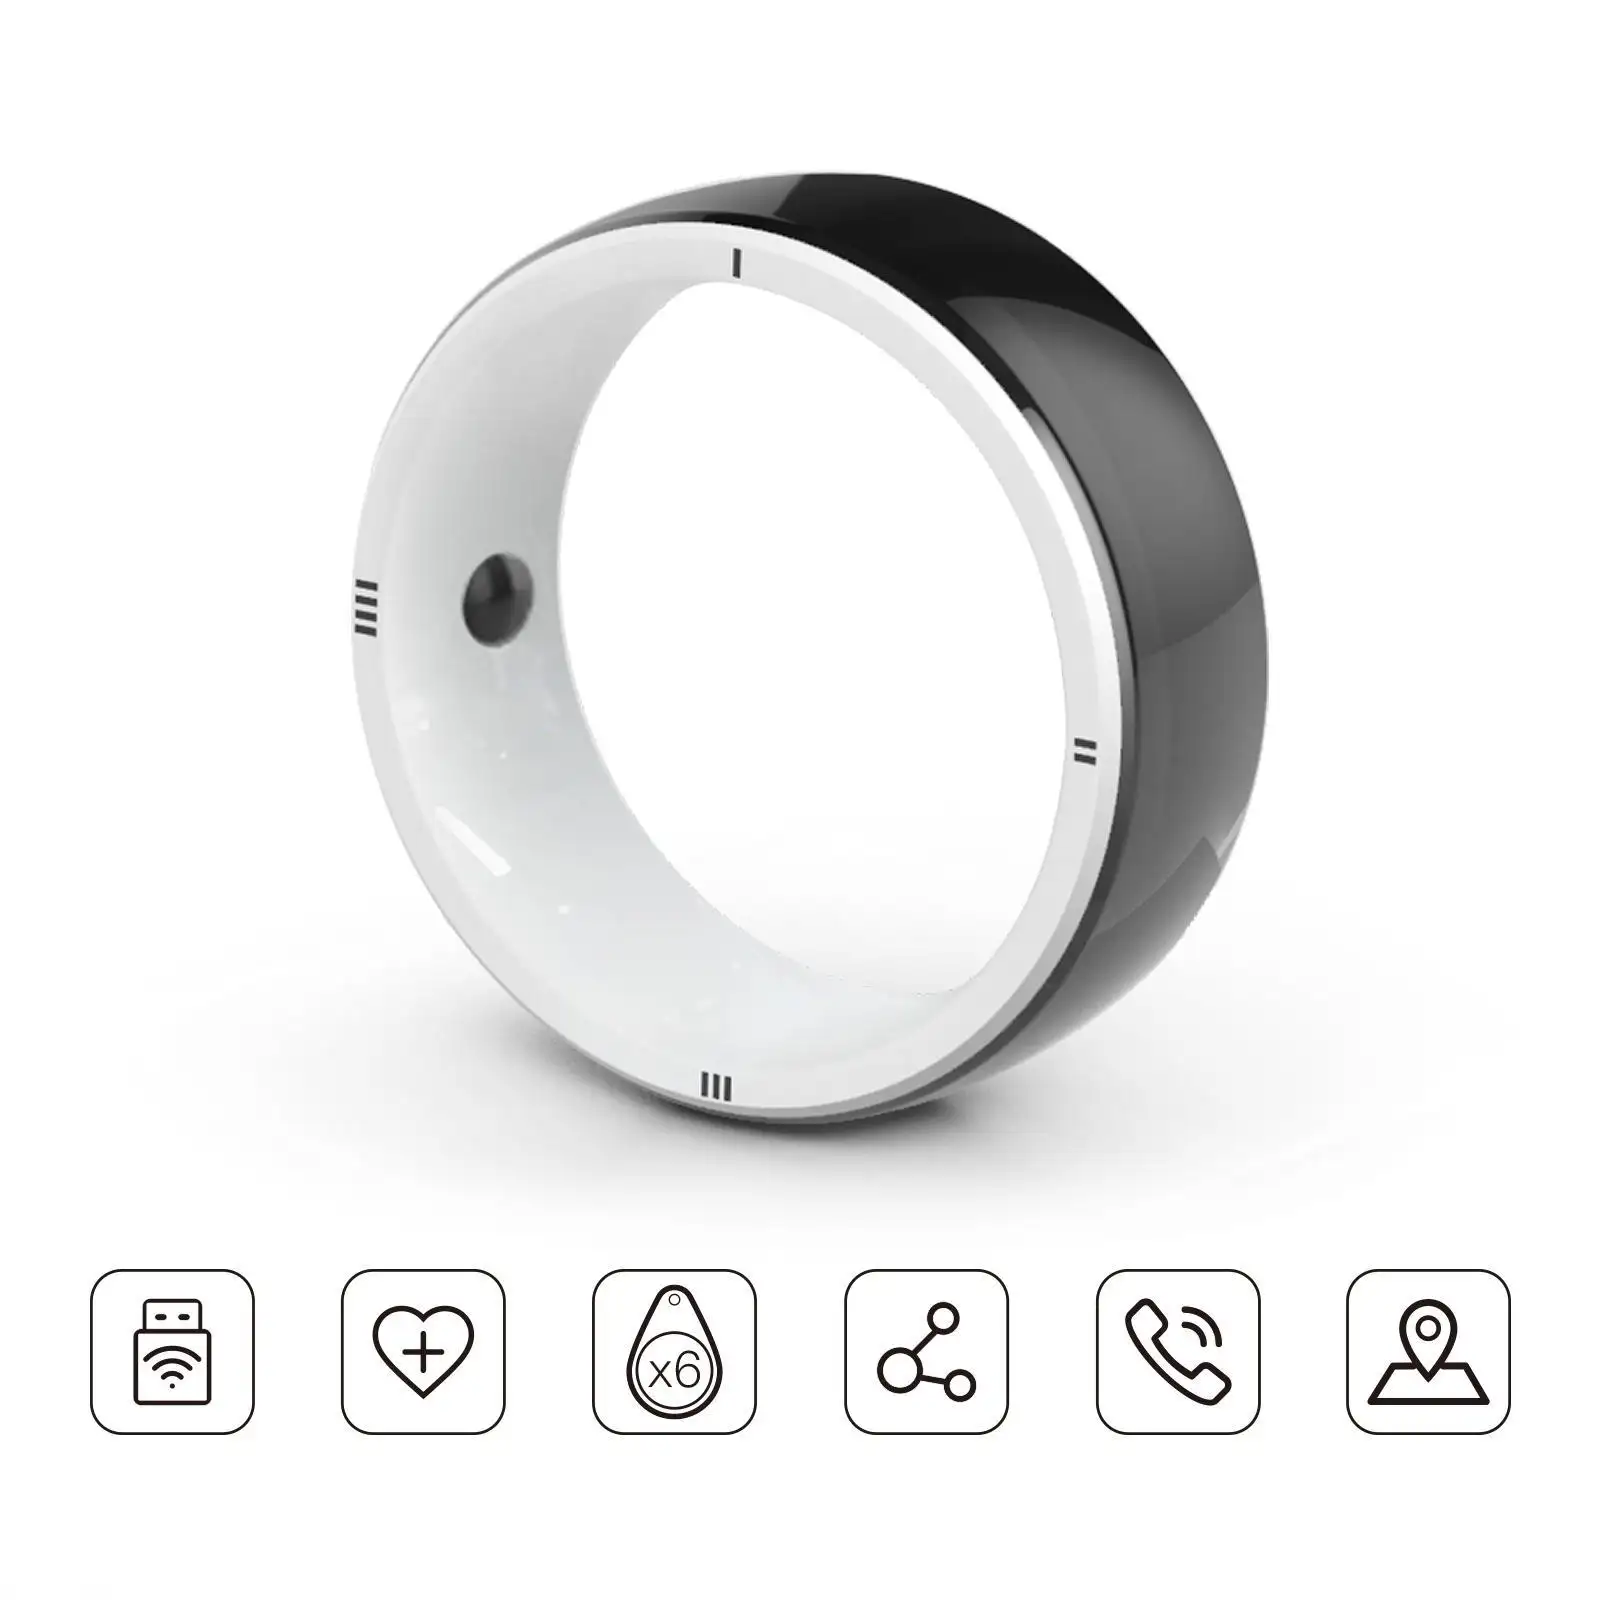 JAKCOM R5 Smart Ring New Smart Ring Super value than collar mic for mobile a8 screen protector mp25 bamboo towel rack drum pad